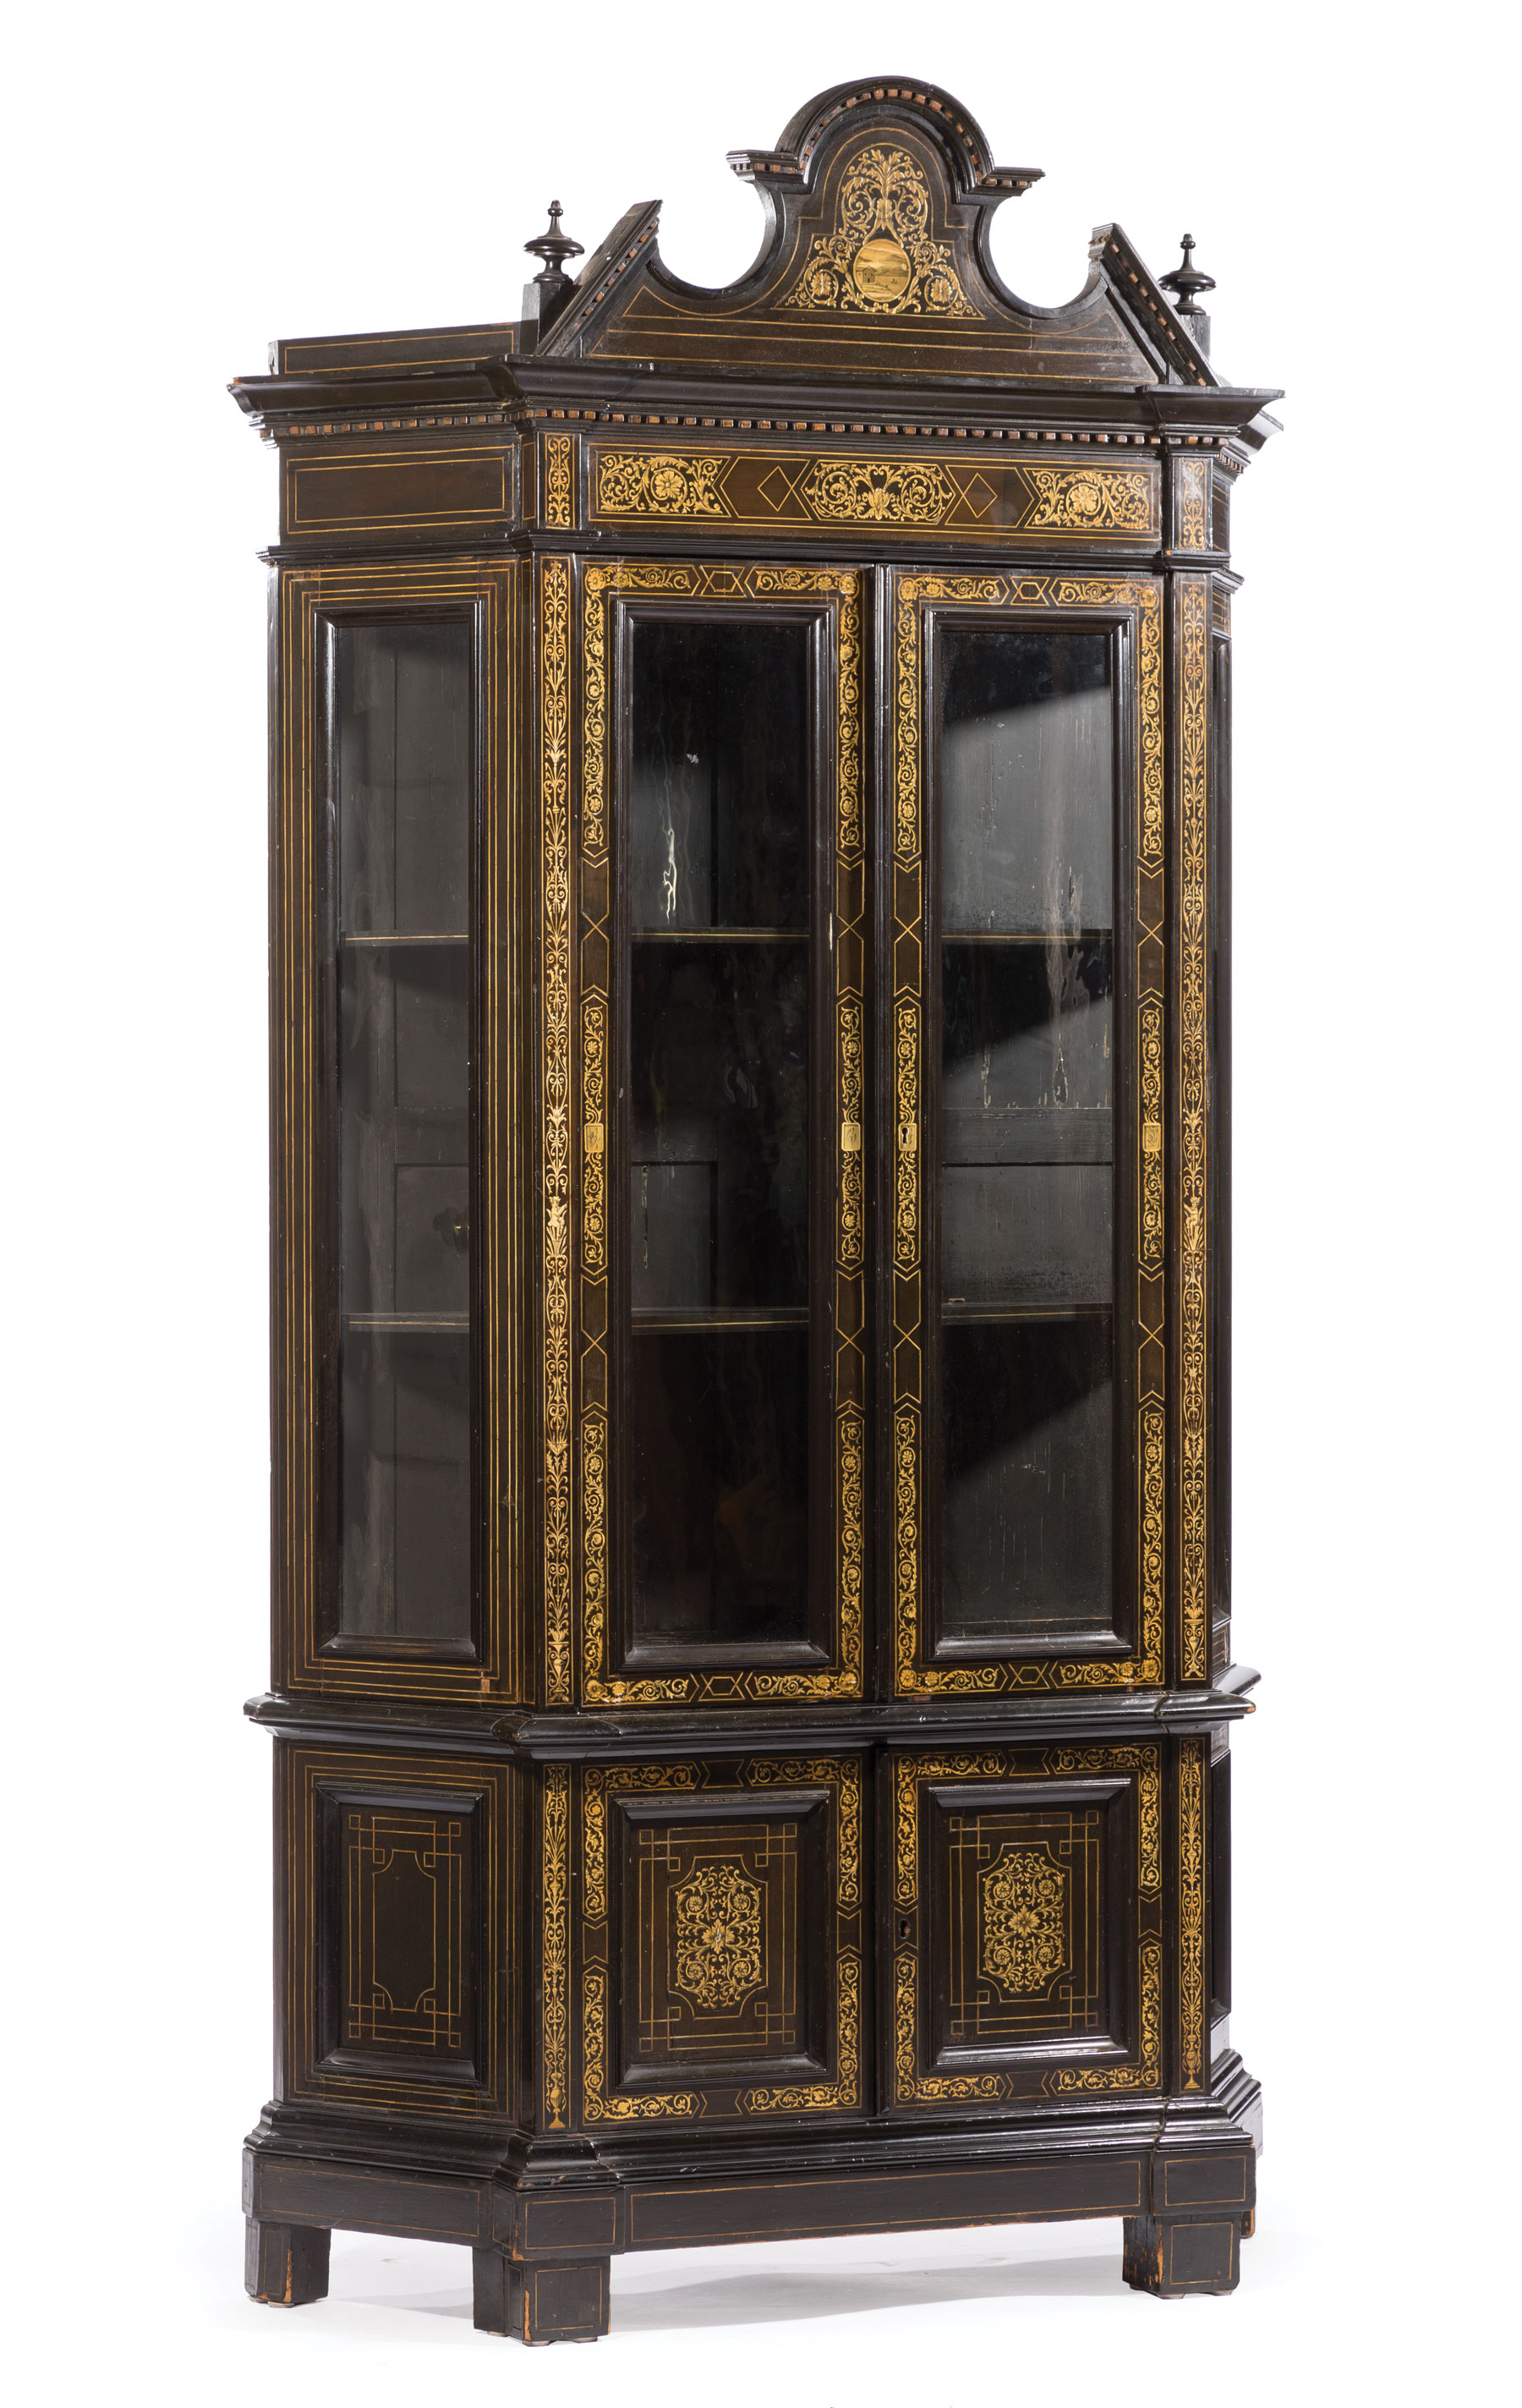 Italian Lombardy Inlaid Collector's Cabinet , late 19th c., broken pediment crest with central